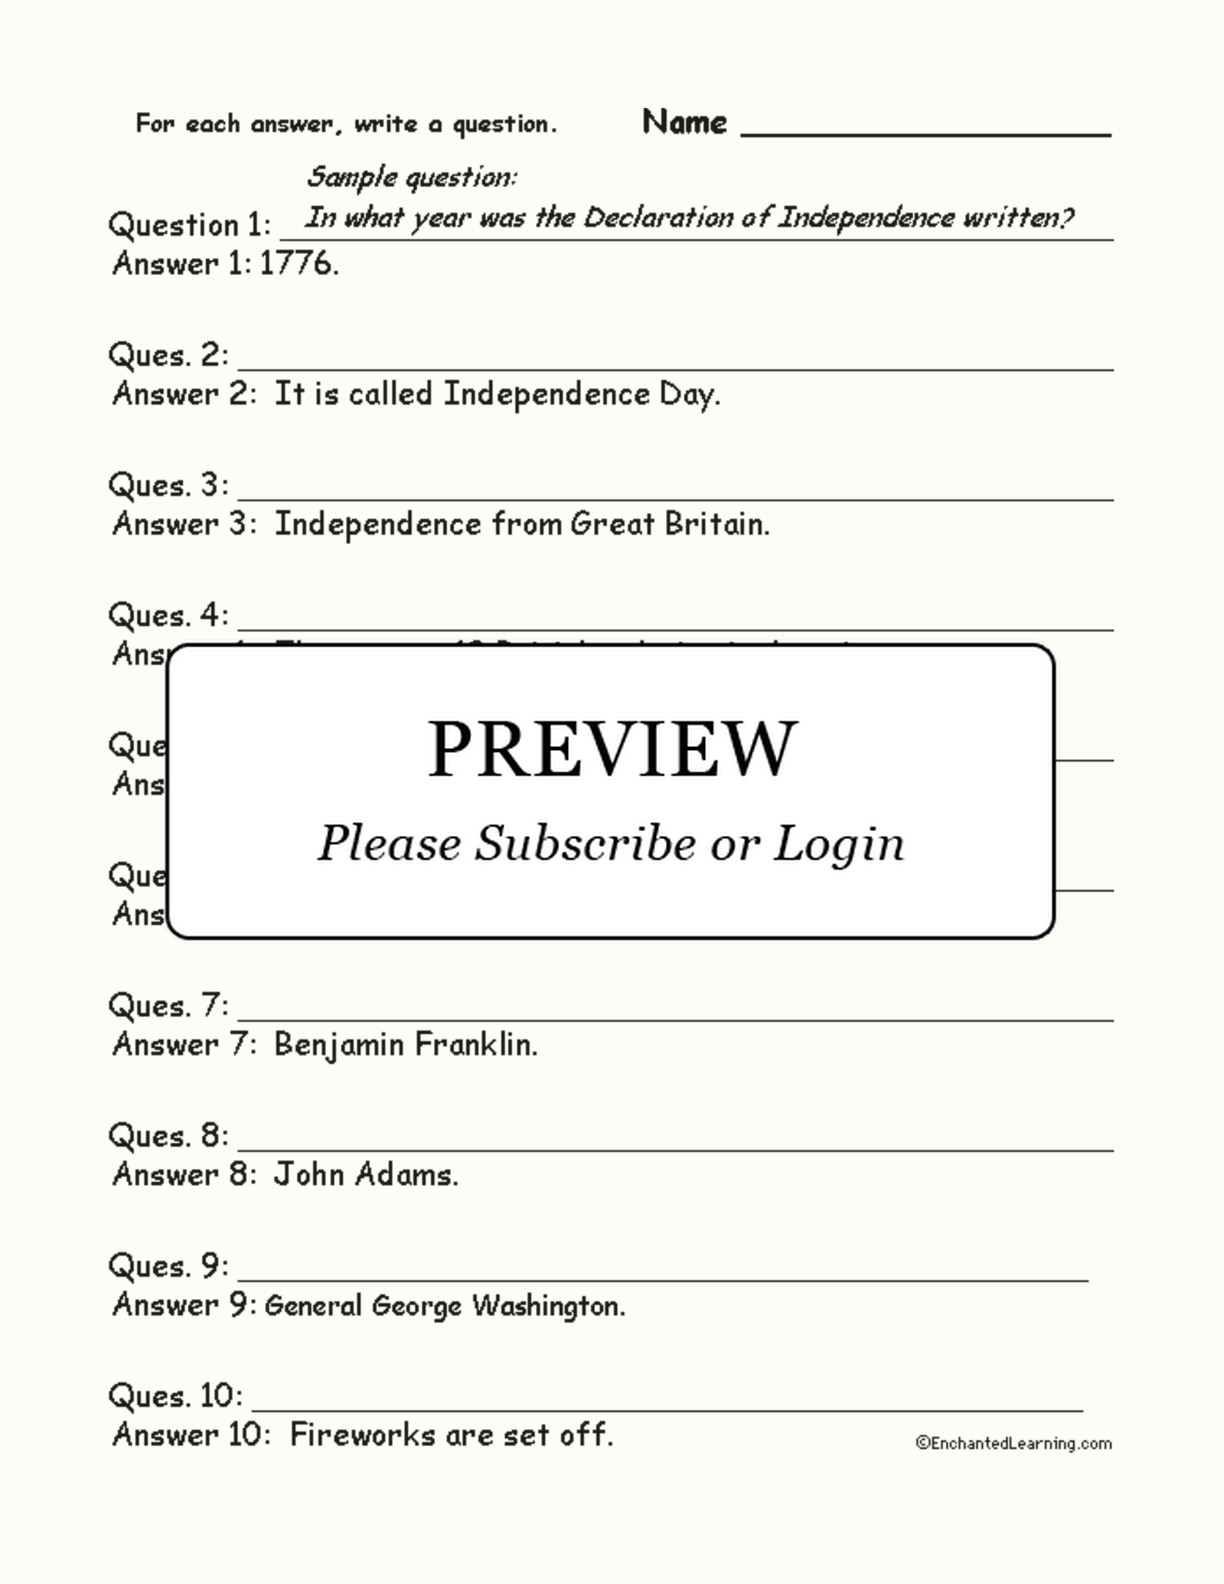 July 4th Words: Write a Question for Each Answer interactive worksheet page 1